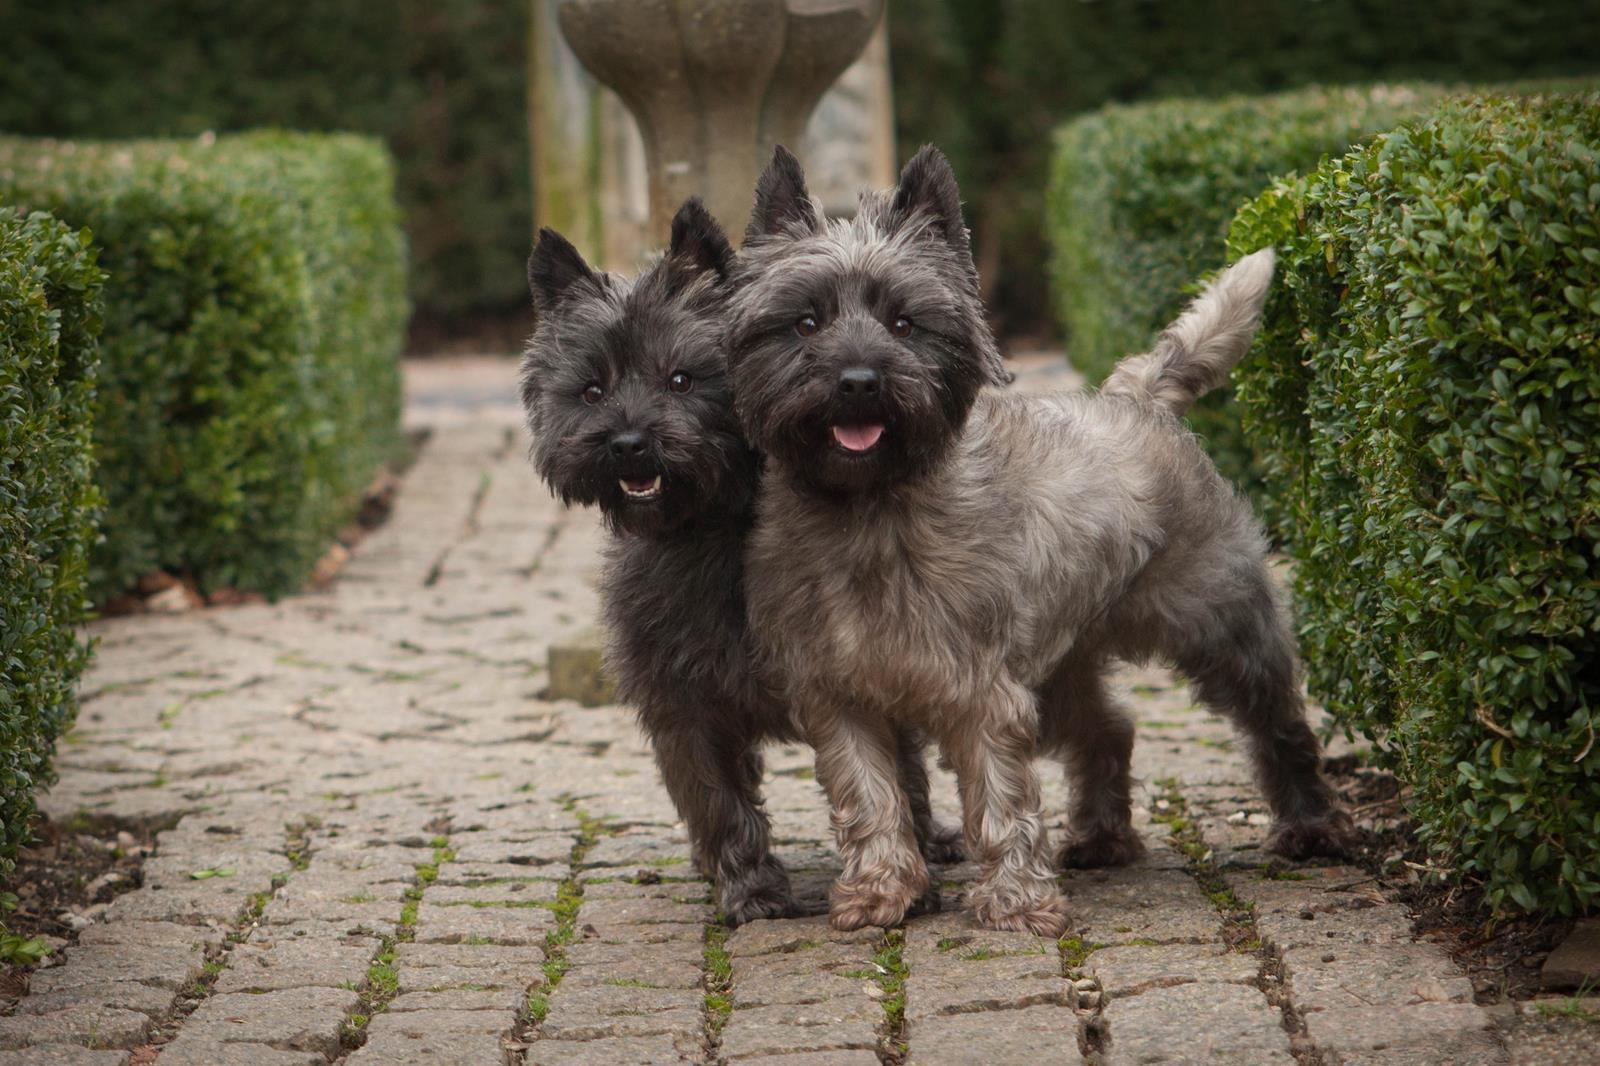 Two small, mischievous looking dogs with slightly scruffy coats and pointy ears are in a formal garden